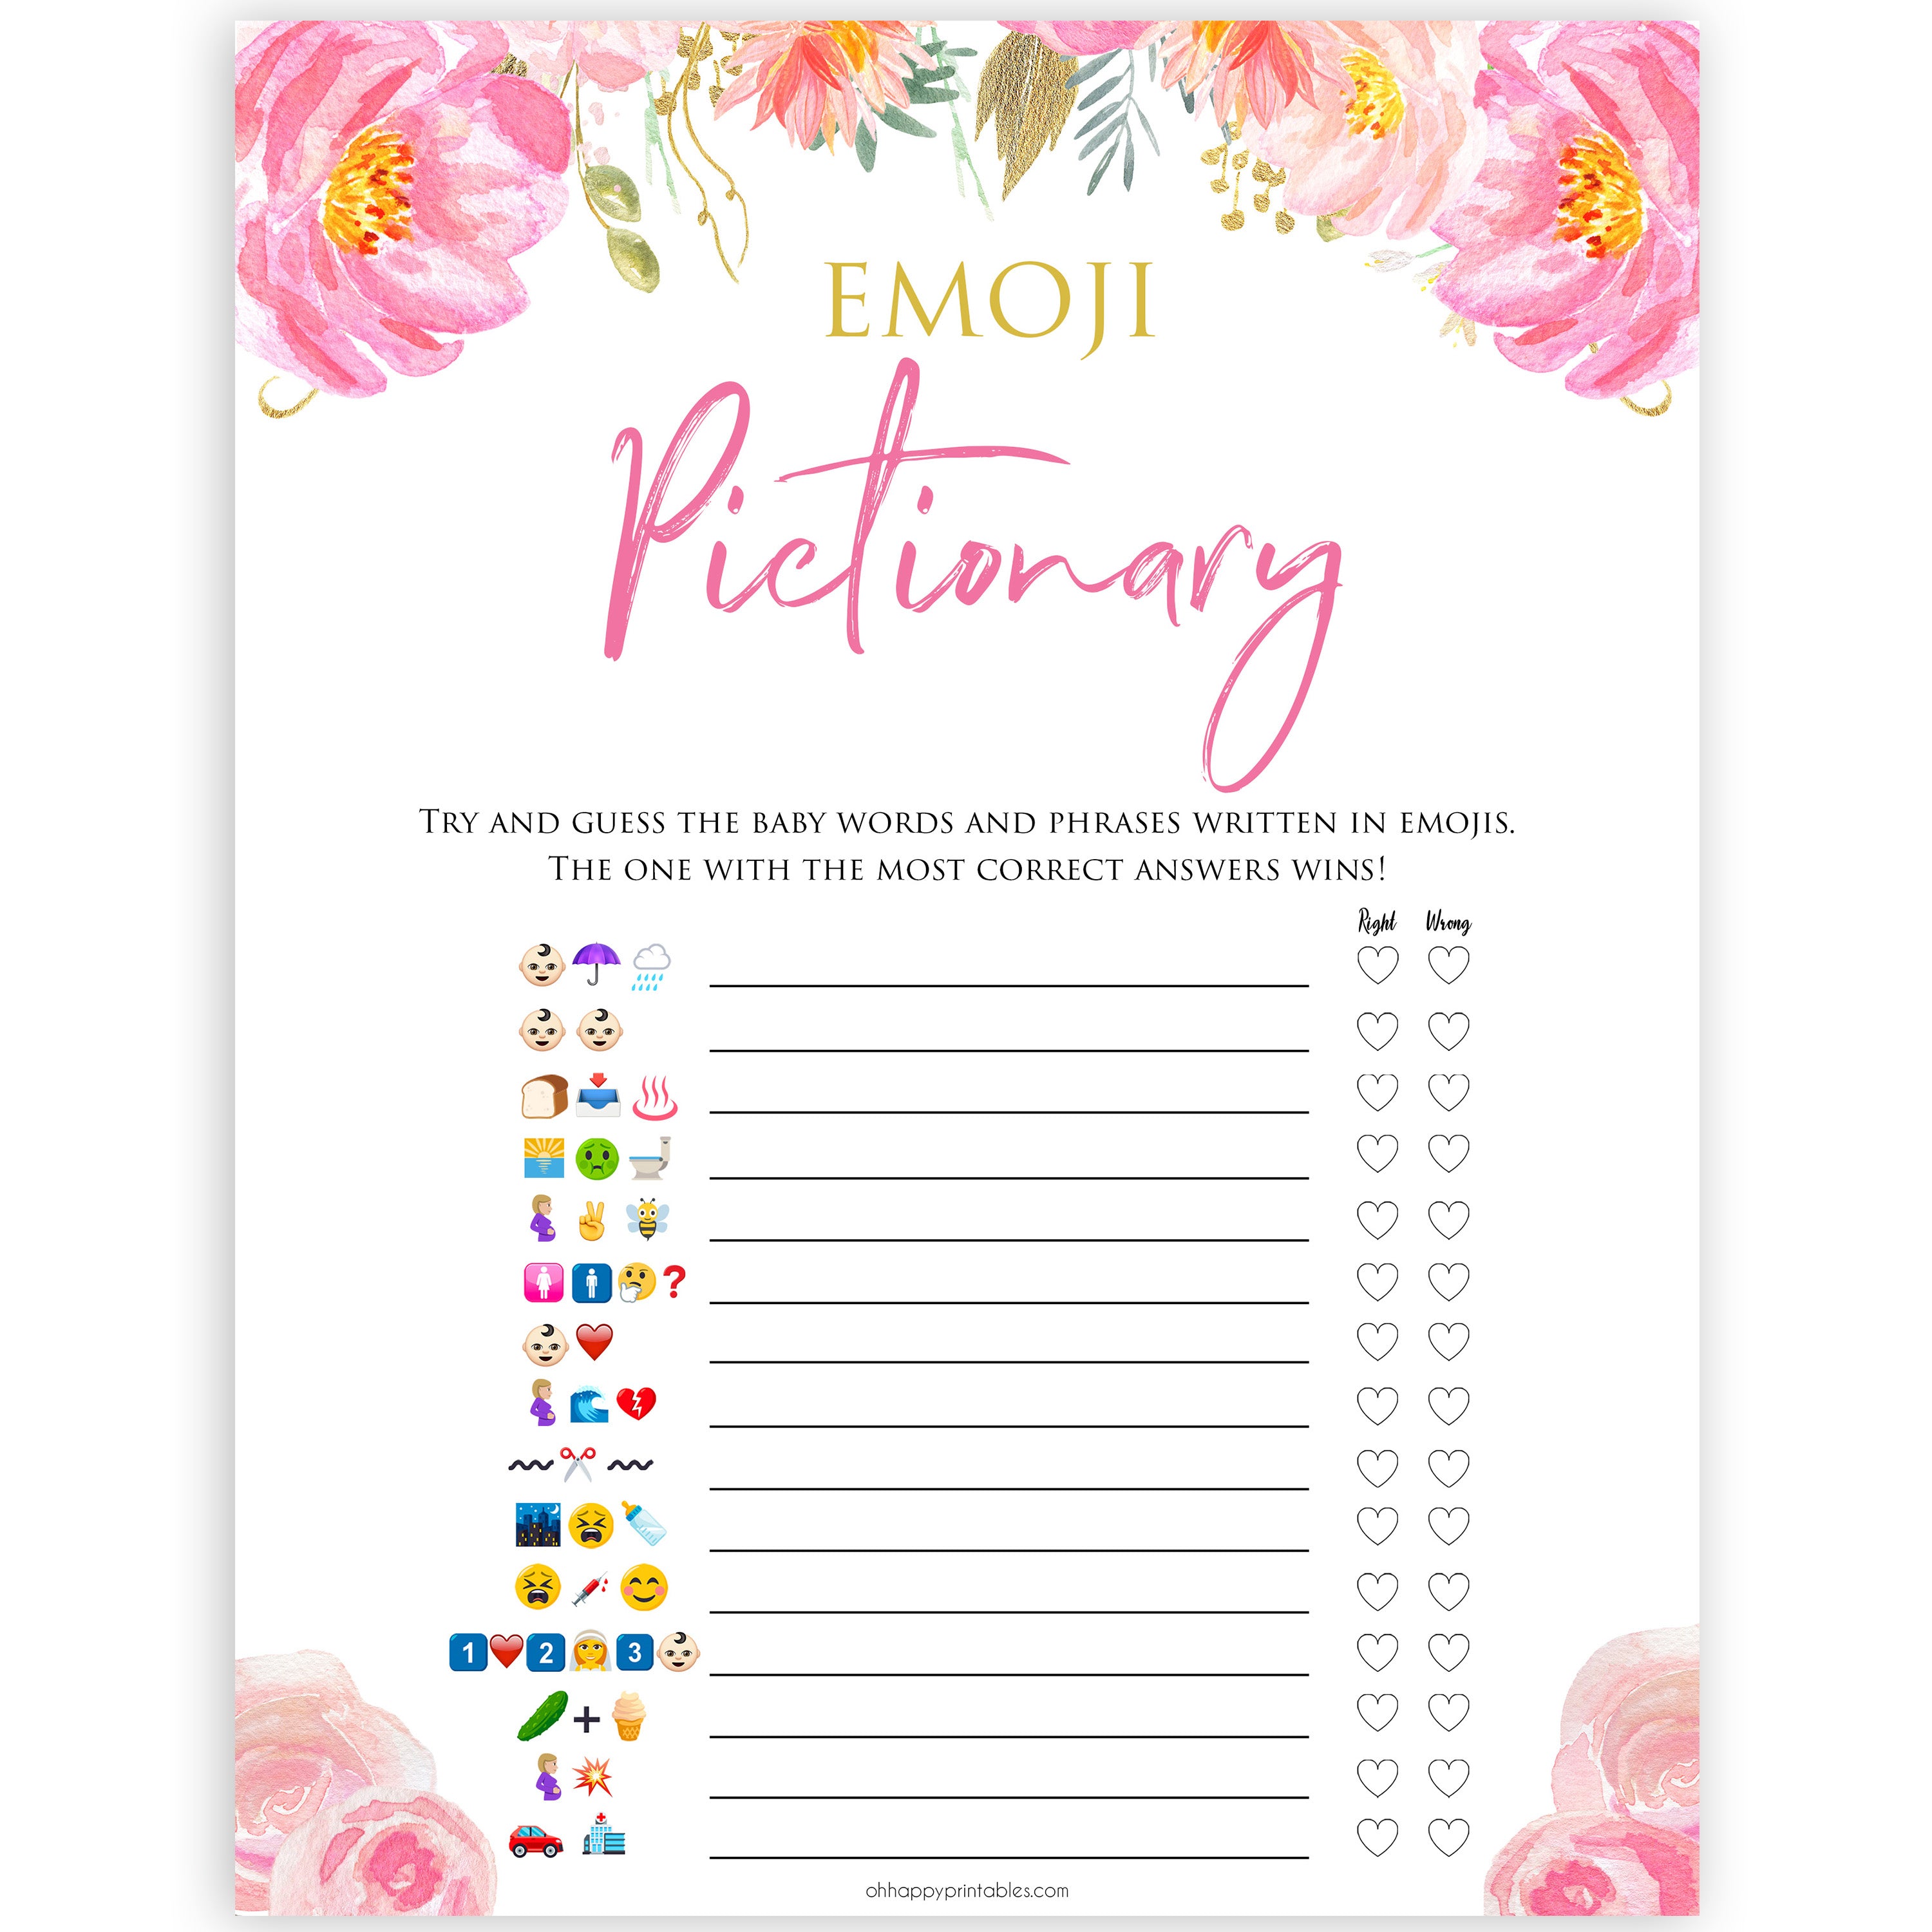 Pink blush floral baby shower emoji pictionary, printable baby games, baby shower games, blush baby shower, floral baby games, girl baby shower ideas, pink baby shower ideas, floral baby games, popular baby games, fun baby games